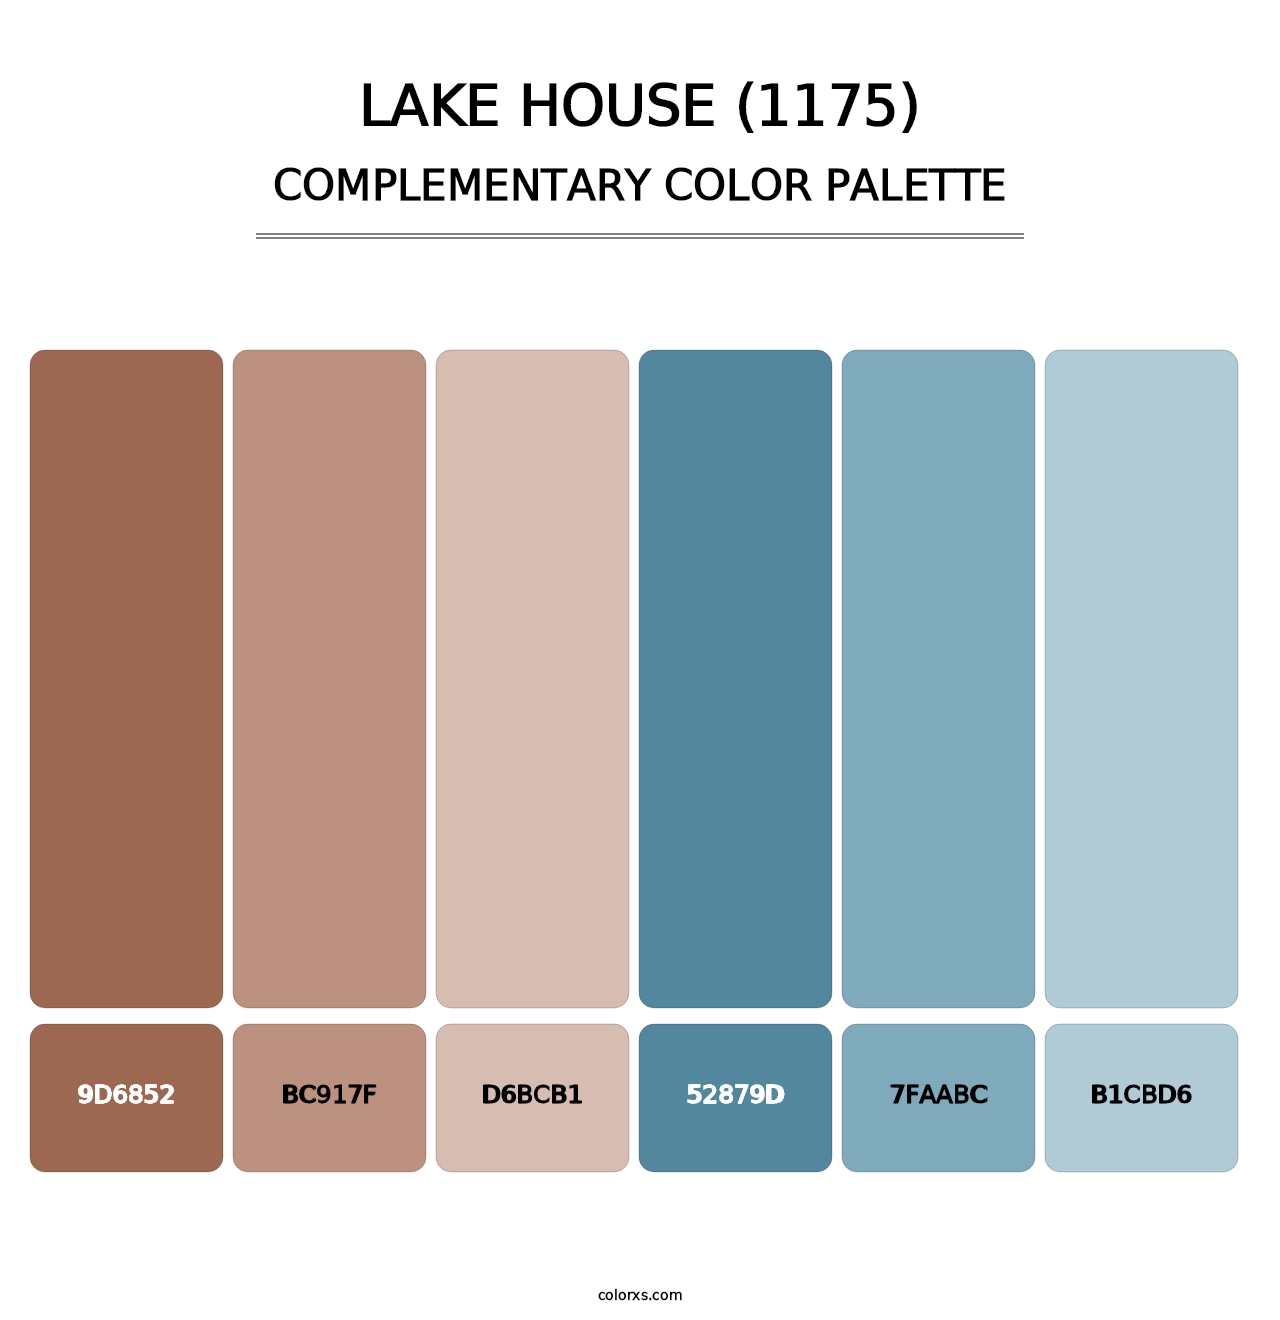 Lake House (1175) - Complementary Color Palette